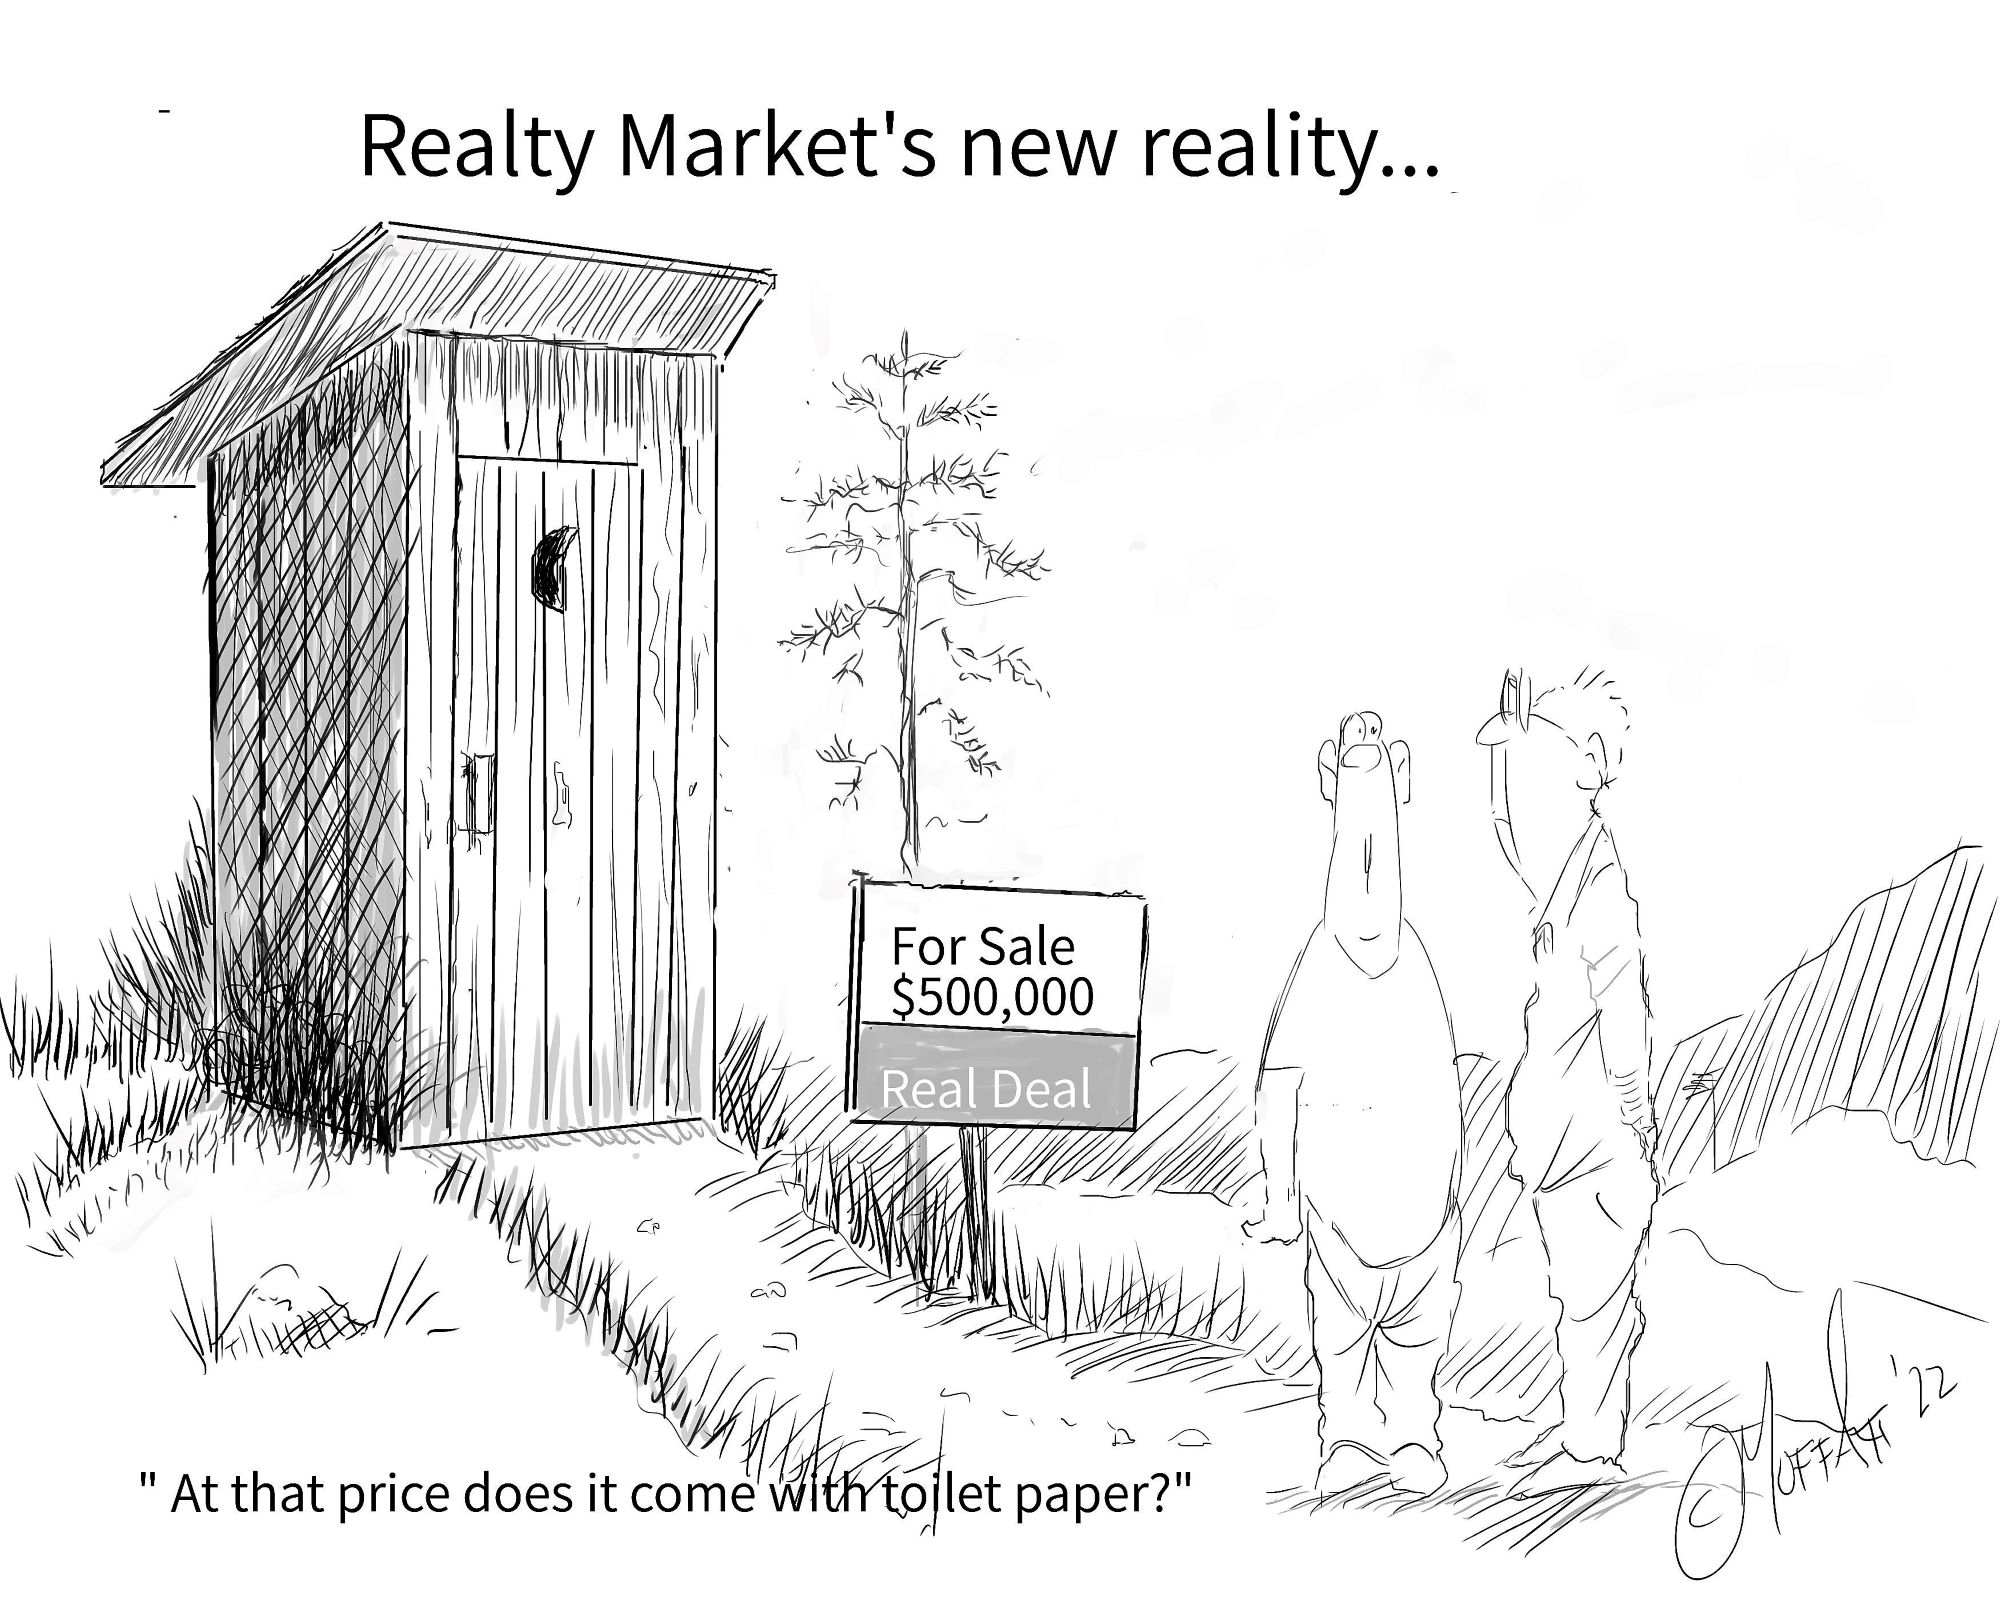 Sunday Funny: Real estate opportunities abound - Sault Ste. Marie News